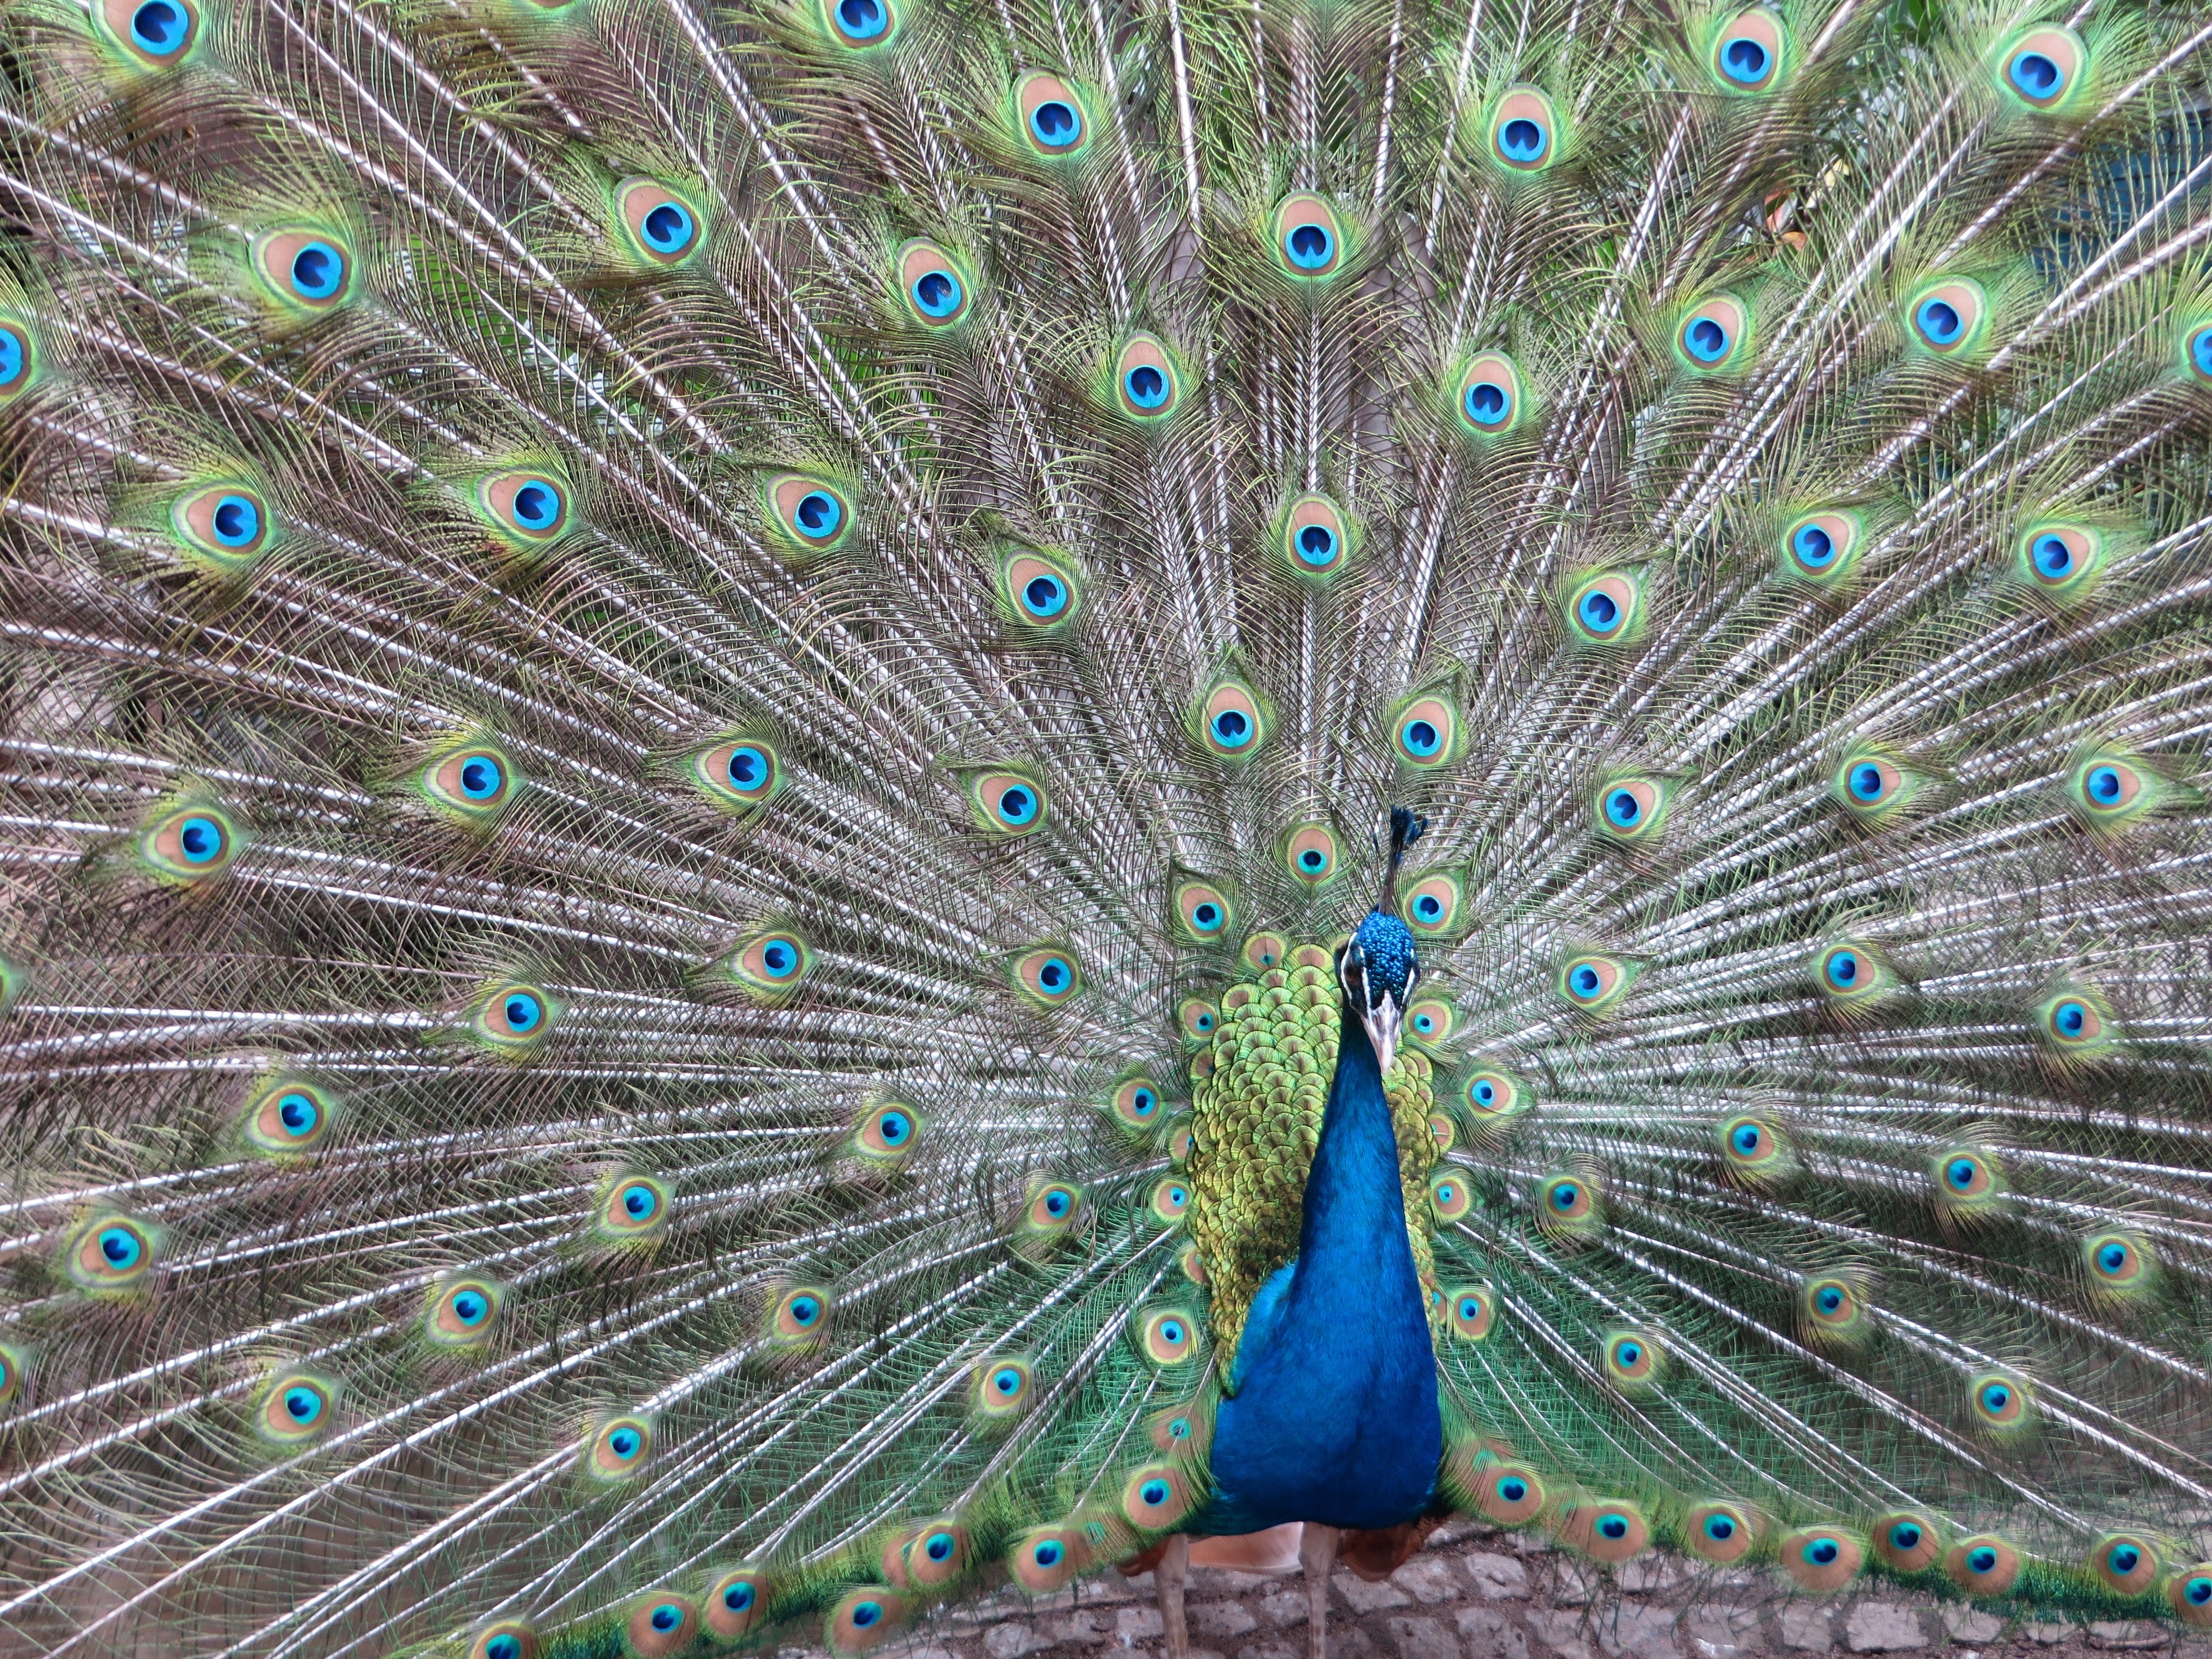 Five Lines About Peacock - HD Wallpaper 